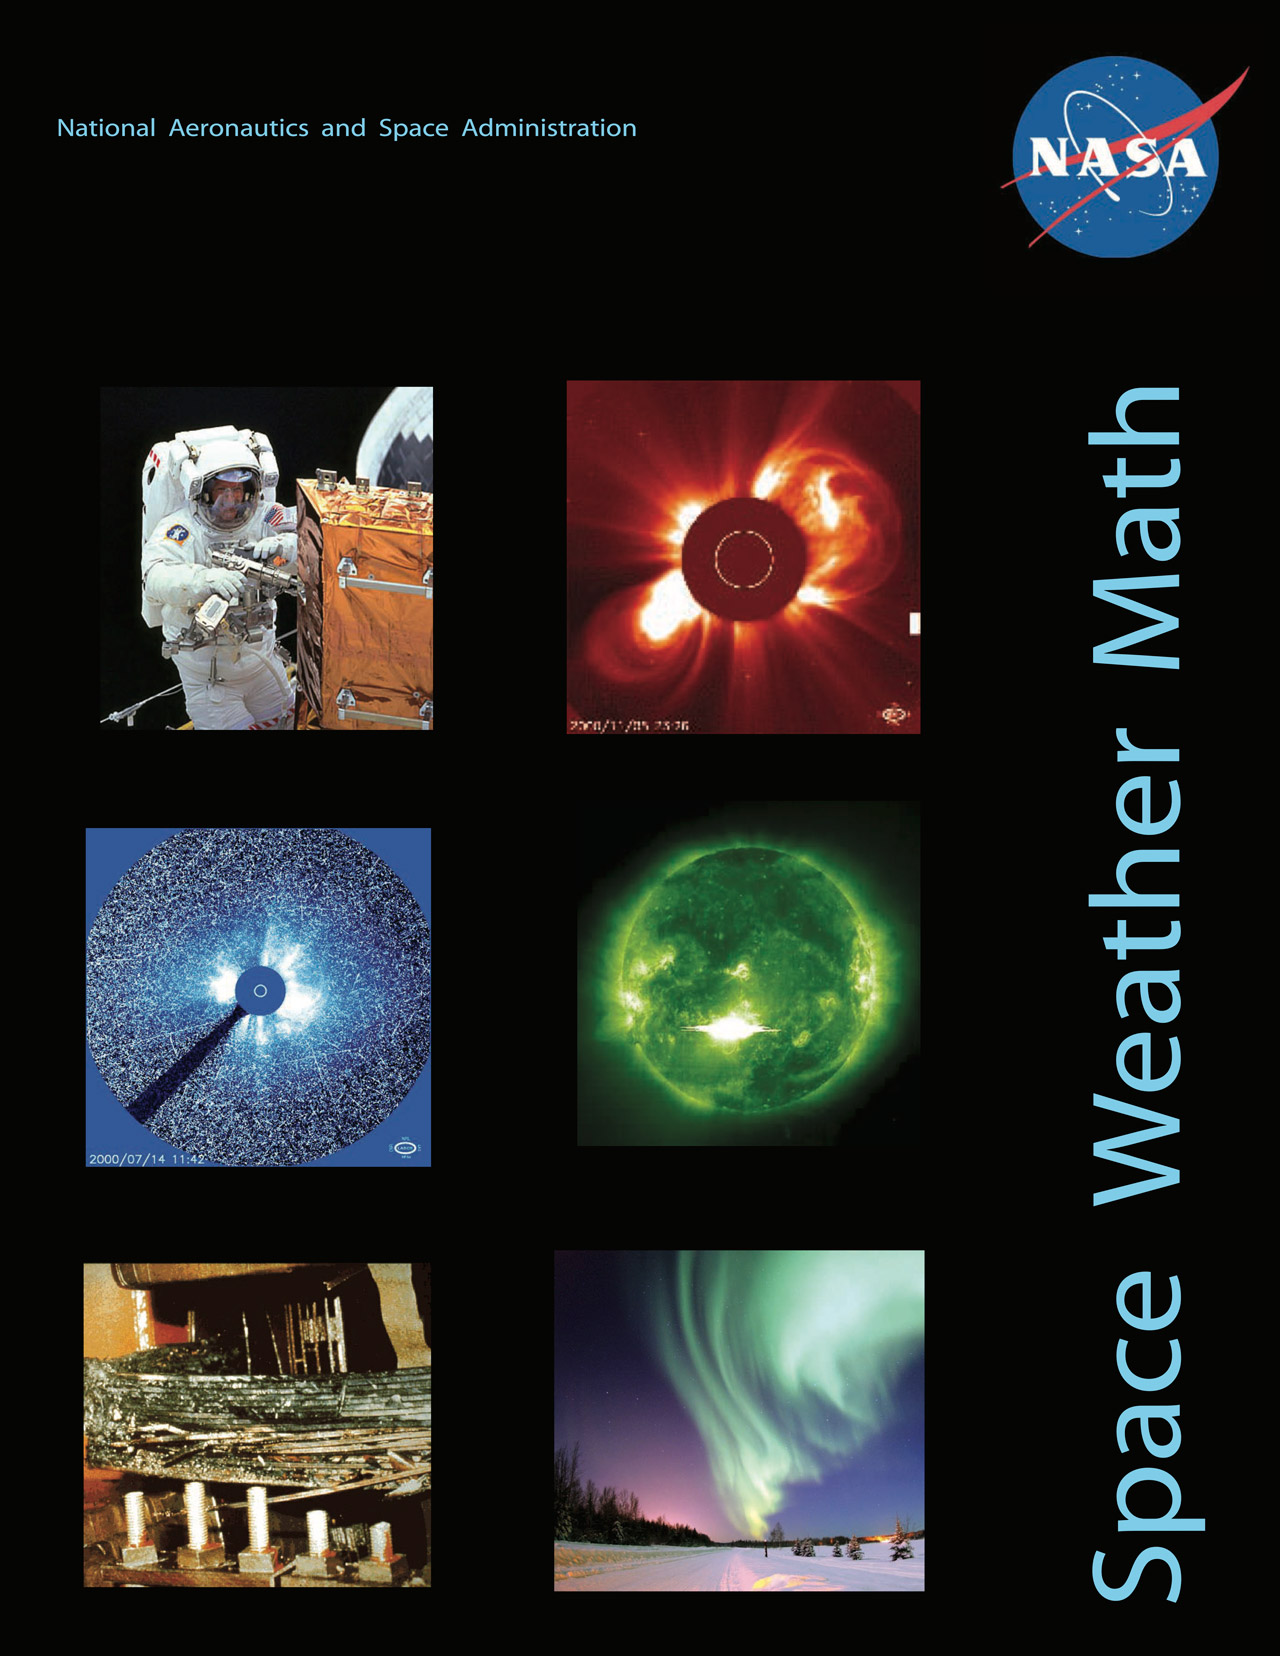 The front cover of the lesson includes:A black background In the upper left hand corner is “National Aeronautics and Space Administration” in a small, light blue fontIn the upper right hand corner the NASA logo is comprised of a small filled in blue circle with ‘NASA’ written in bold white letters in the center, small stars, an elliptical orbital path in white, and a red winged chevron cross and orbit the wordThe title ‘Space Weather Math’ runs vertically up the right hand side of the page in a light blue fontSix images from left to right:An astronaut in space doing repairs to a spacecraft. The astronaut is holding a drill. The spacecraft is metallic orange. The astronaut has an American flag patch on his space suit and he is smiling.SOHO Satellite image of a Coronal Mass Ejection where light yellow loops explode out of the edges of an orange Sun, the center of the Sun is covered in a red disc to simulate an eclipse so scientists can better see the coronaA coronagraph, showing data in blue. There is a small, lighter blue circle in the center, representing the Sun. There is a darker blue circle around the Sun that represents the occulting disk. Bright white light streams from behind the occulting disk. A bigger circle surrounds the occulting disk, containing distorted images of background stars, shown with squiggly lines. A fraction of this circle is blacked out from missing data. The time stamp is in white in the lower right hand corner of the coronagraph, “2000/07/14 11:42.” SDO satellite image of a green sun, where the highest intensity and whitest color is active solar